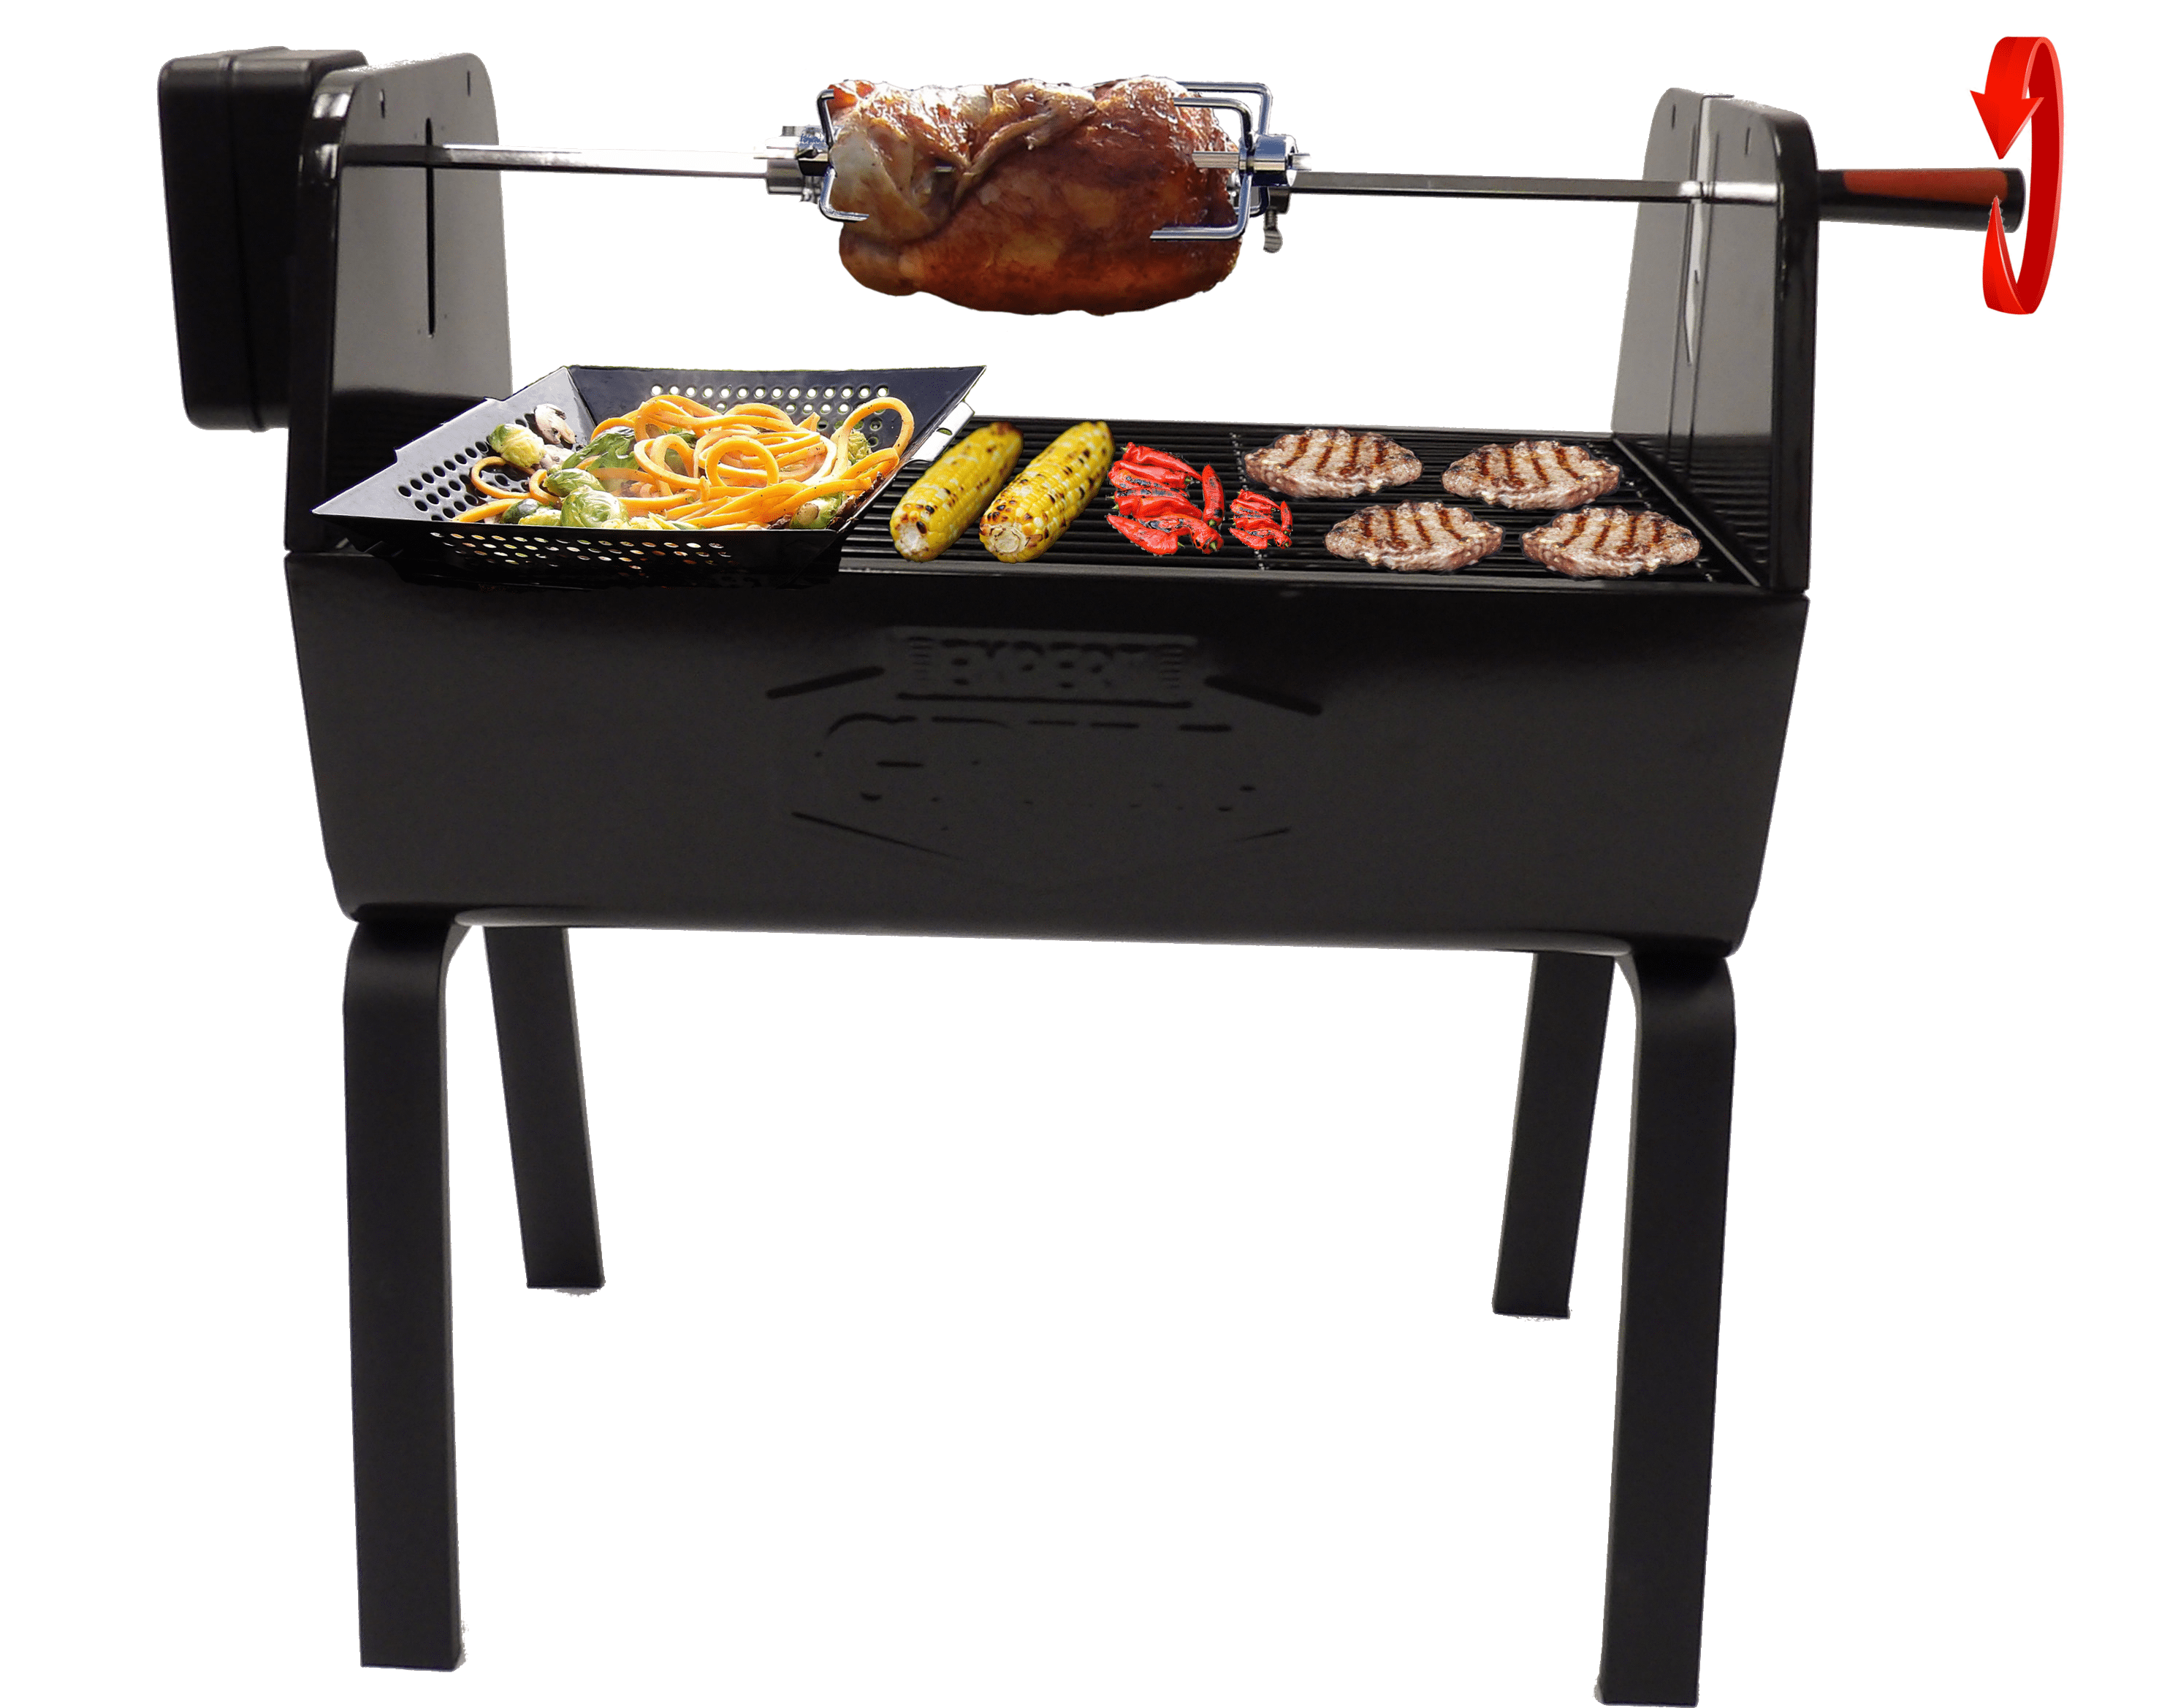 LQKYWNA BBQ Charcoal Rotisserie Grill Portable 17.5lb Capable 20W Motor Automatic Stainless Steel Grilling Fork Camping Picnics Spit Grill Roaster for Fish Chicken Rabbit Cooking